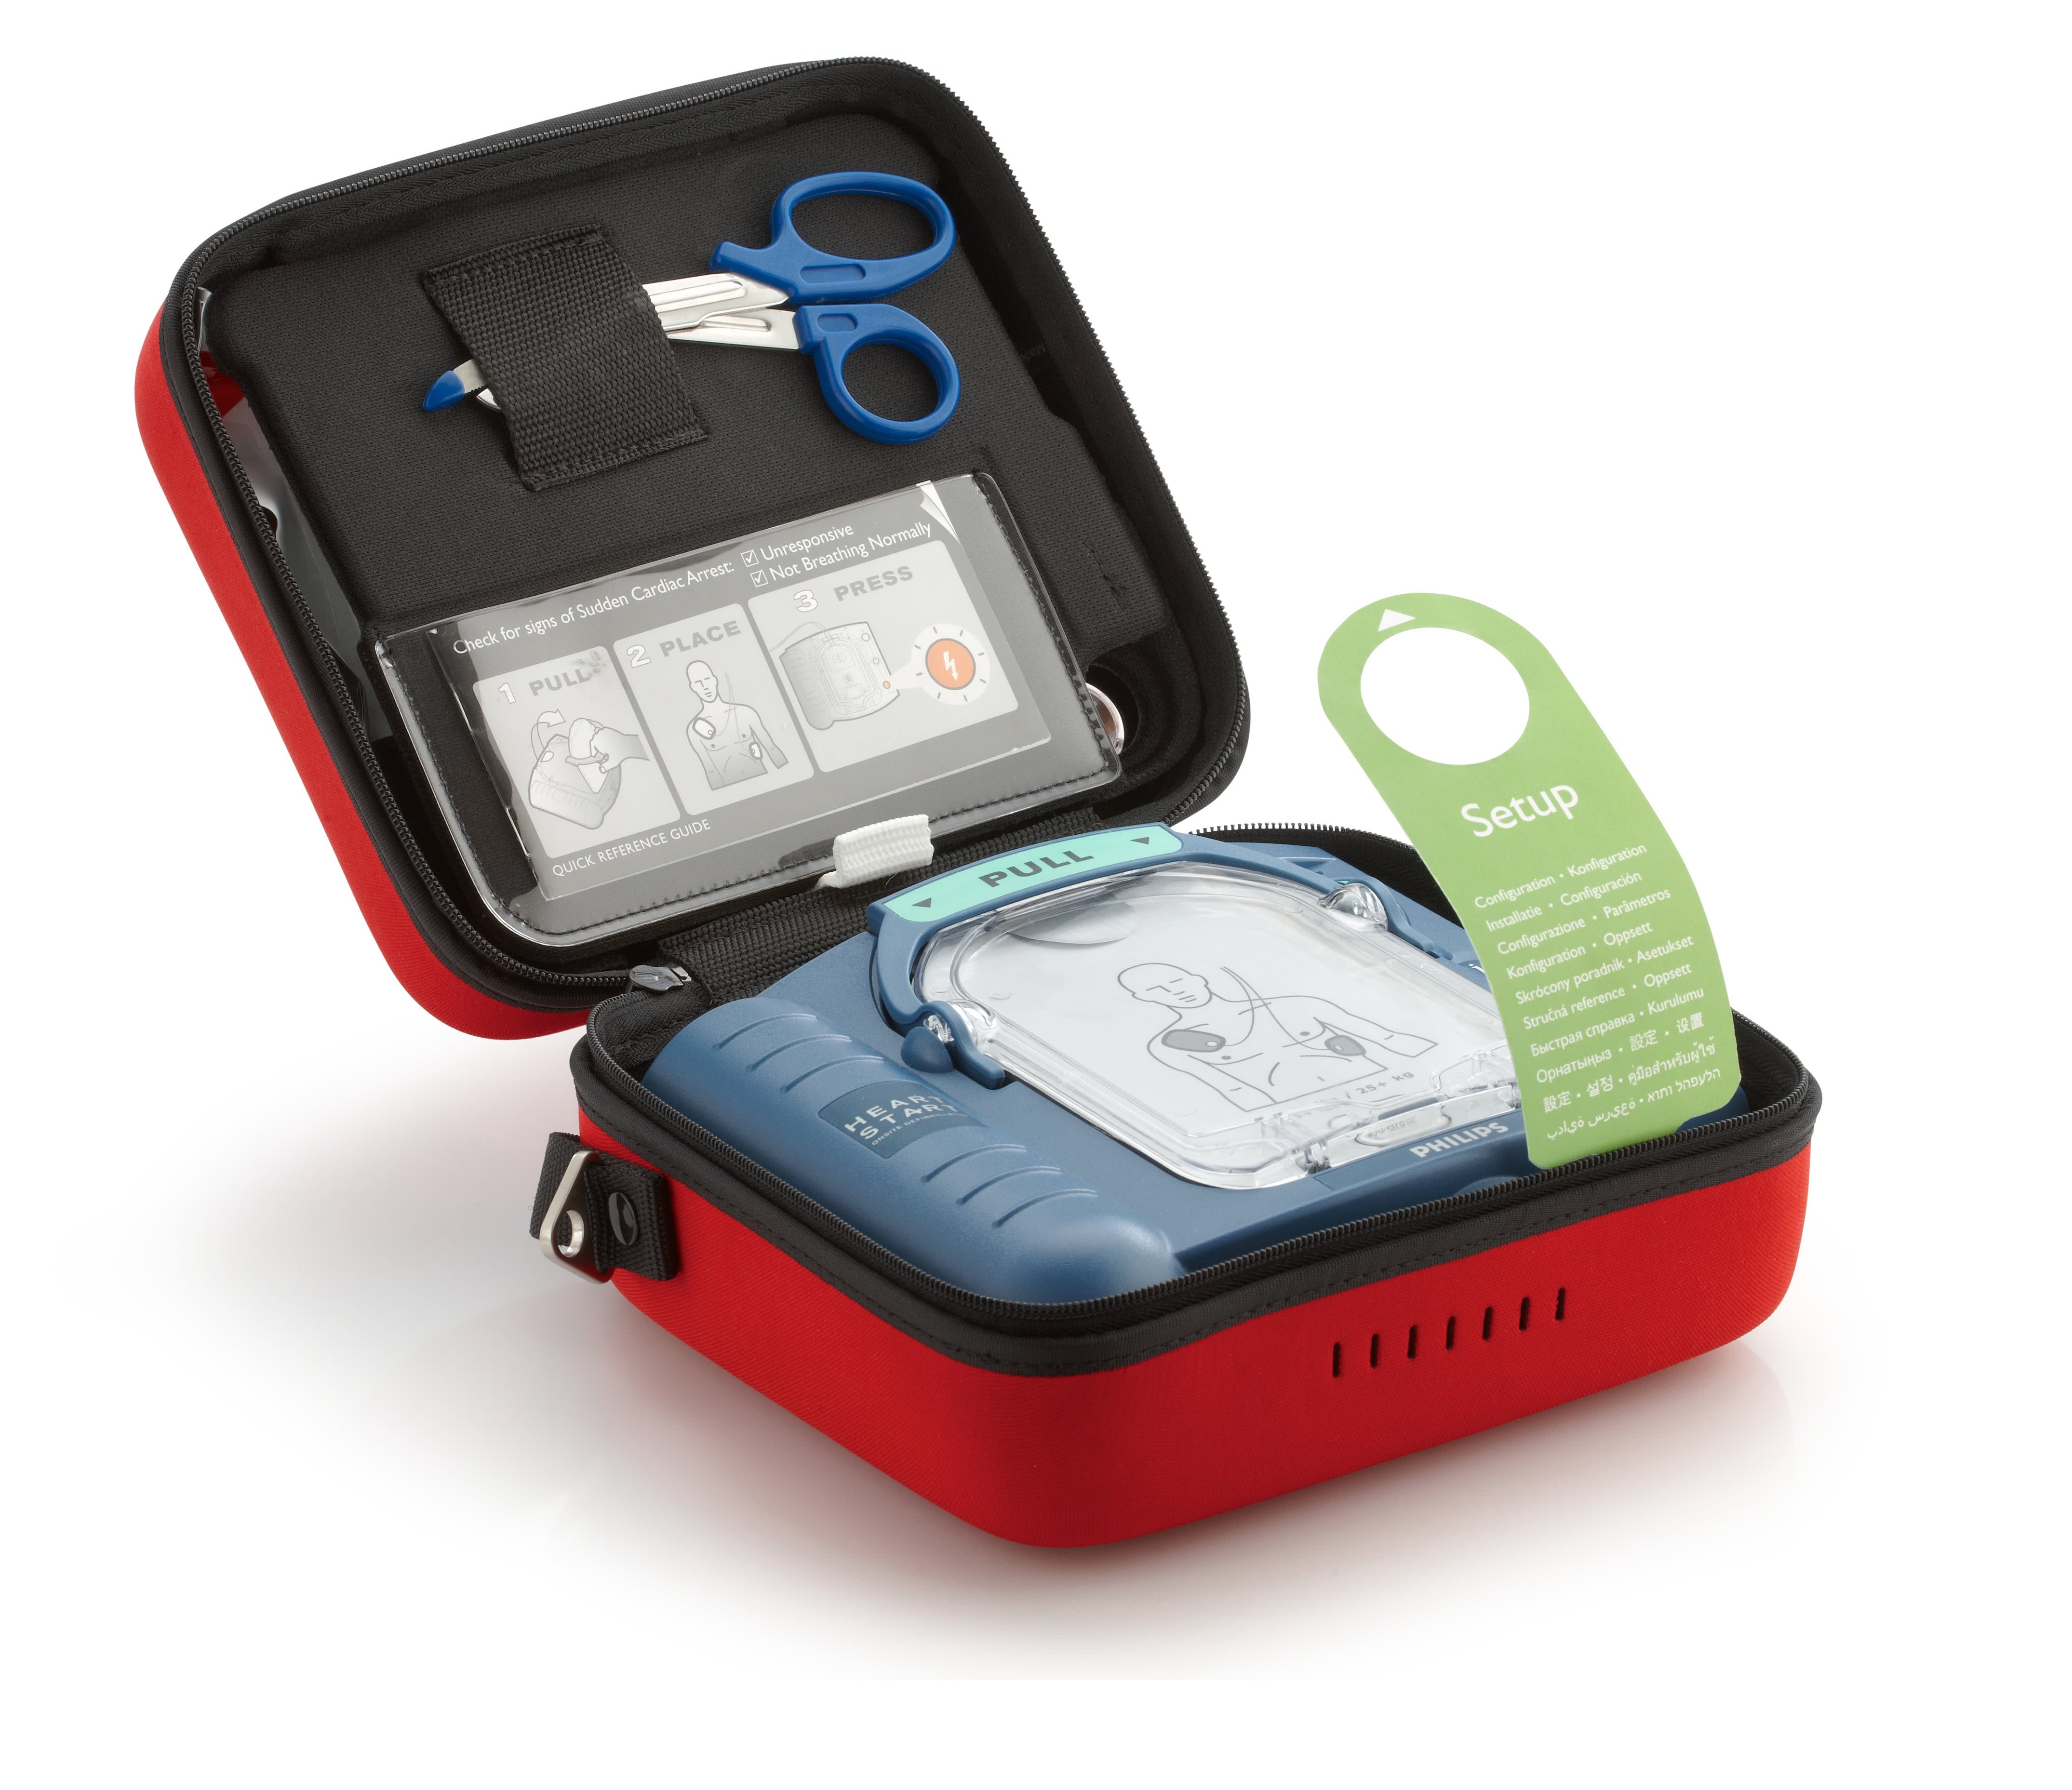 Onsite AED with Ready Pack in Cabinet image